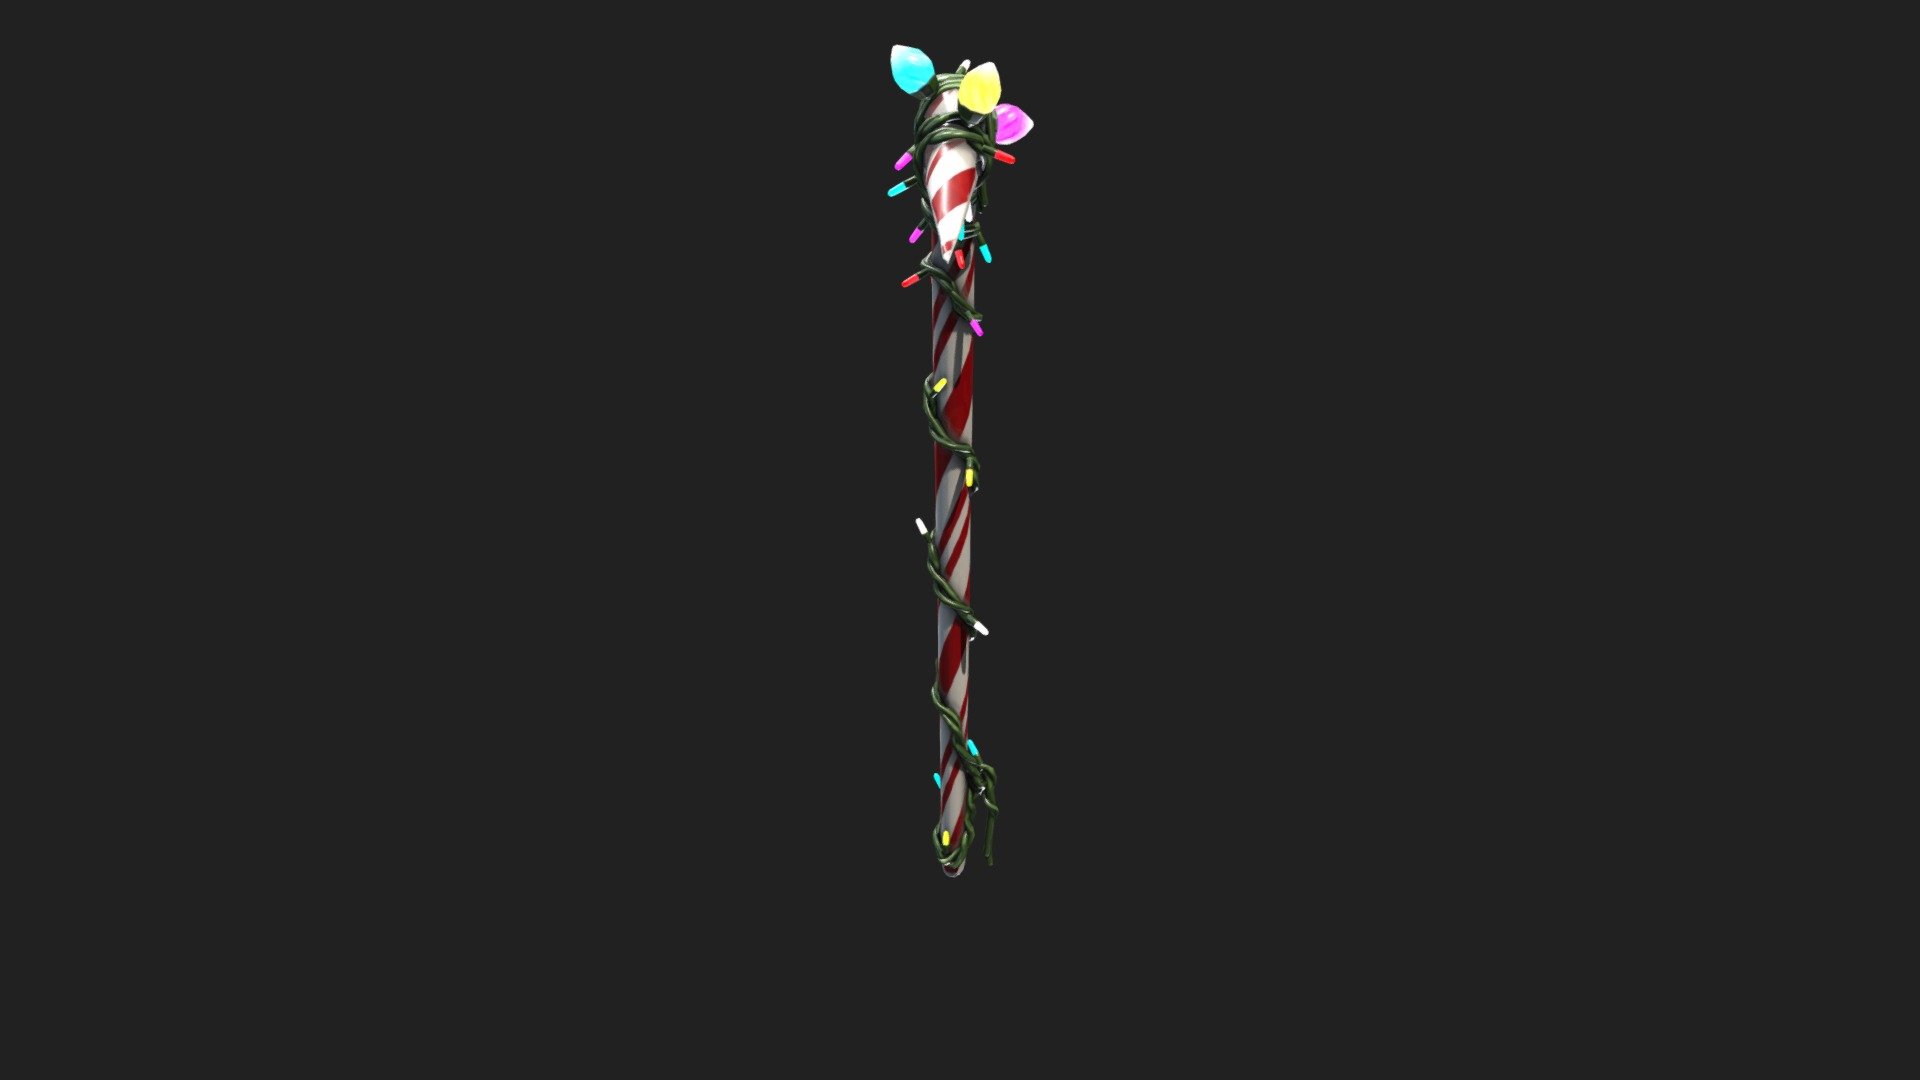 Fortnite Candy Axe